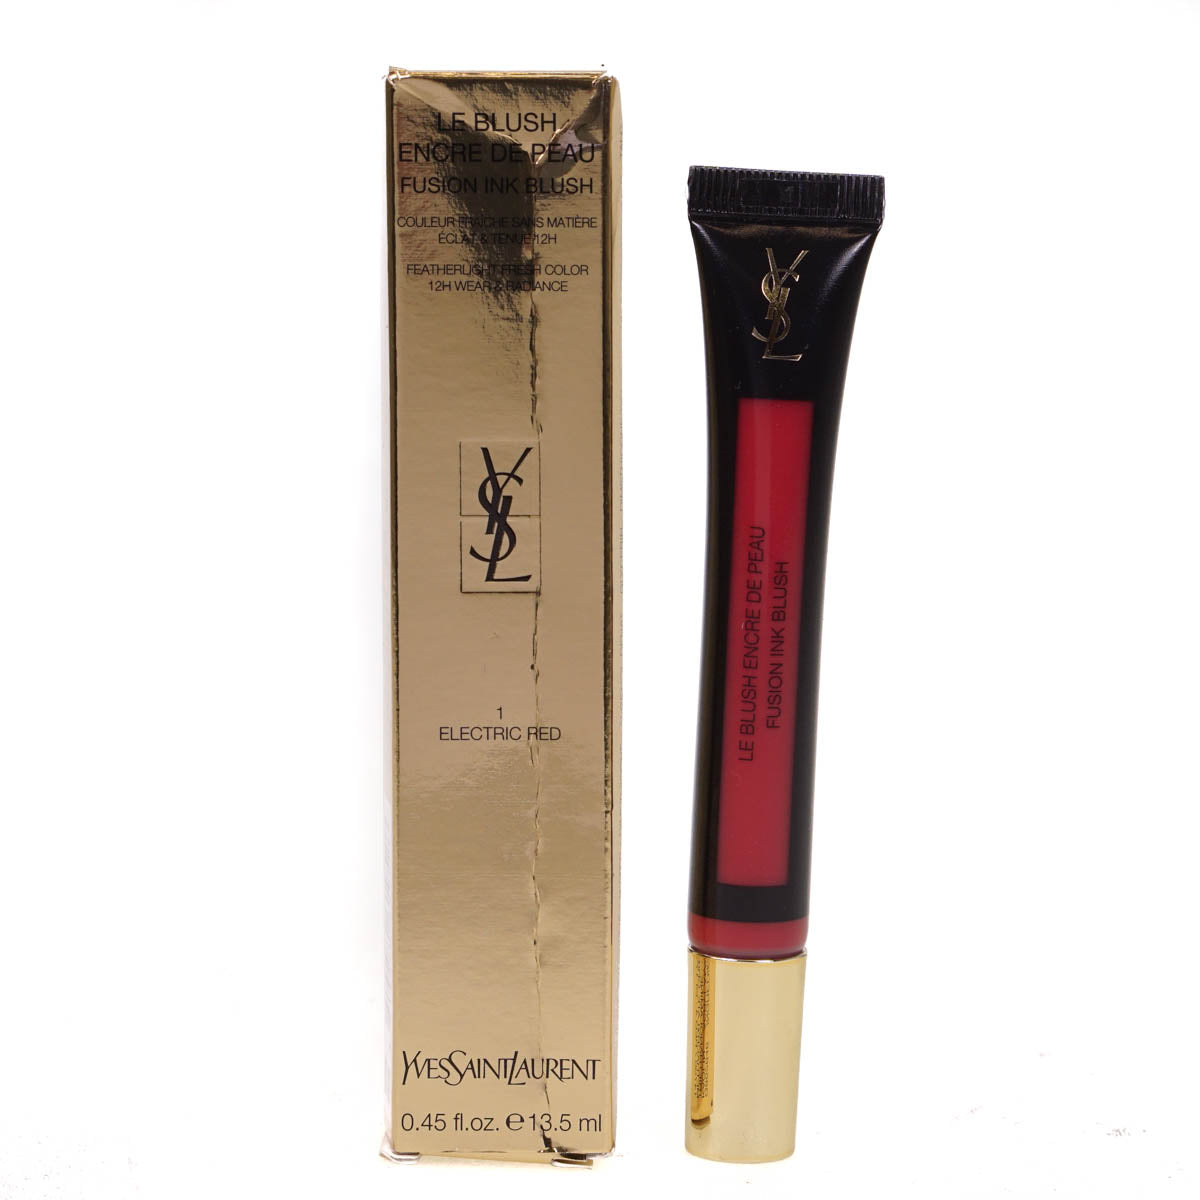 YSL Le Blush Fusion Ink Blush Electric Red No 1